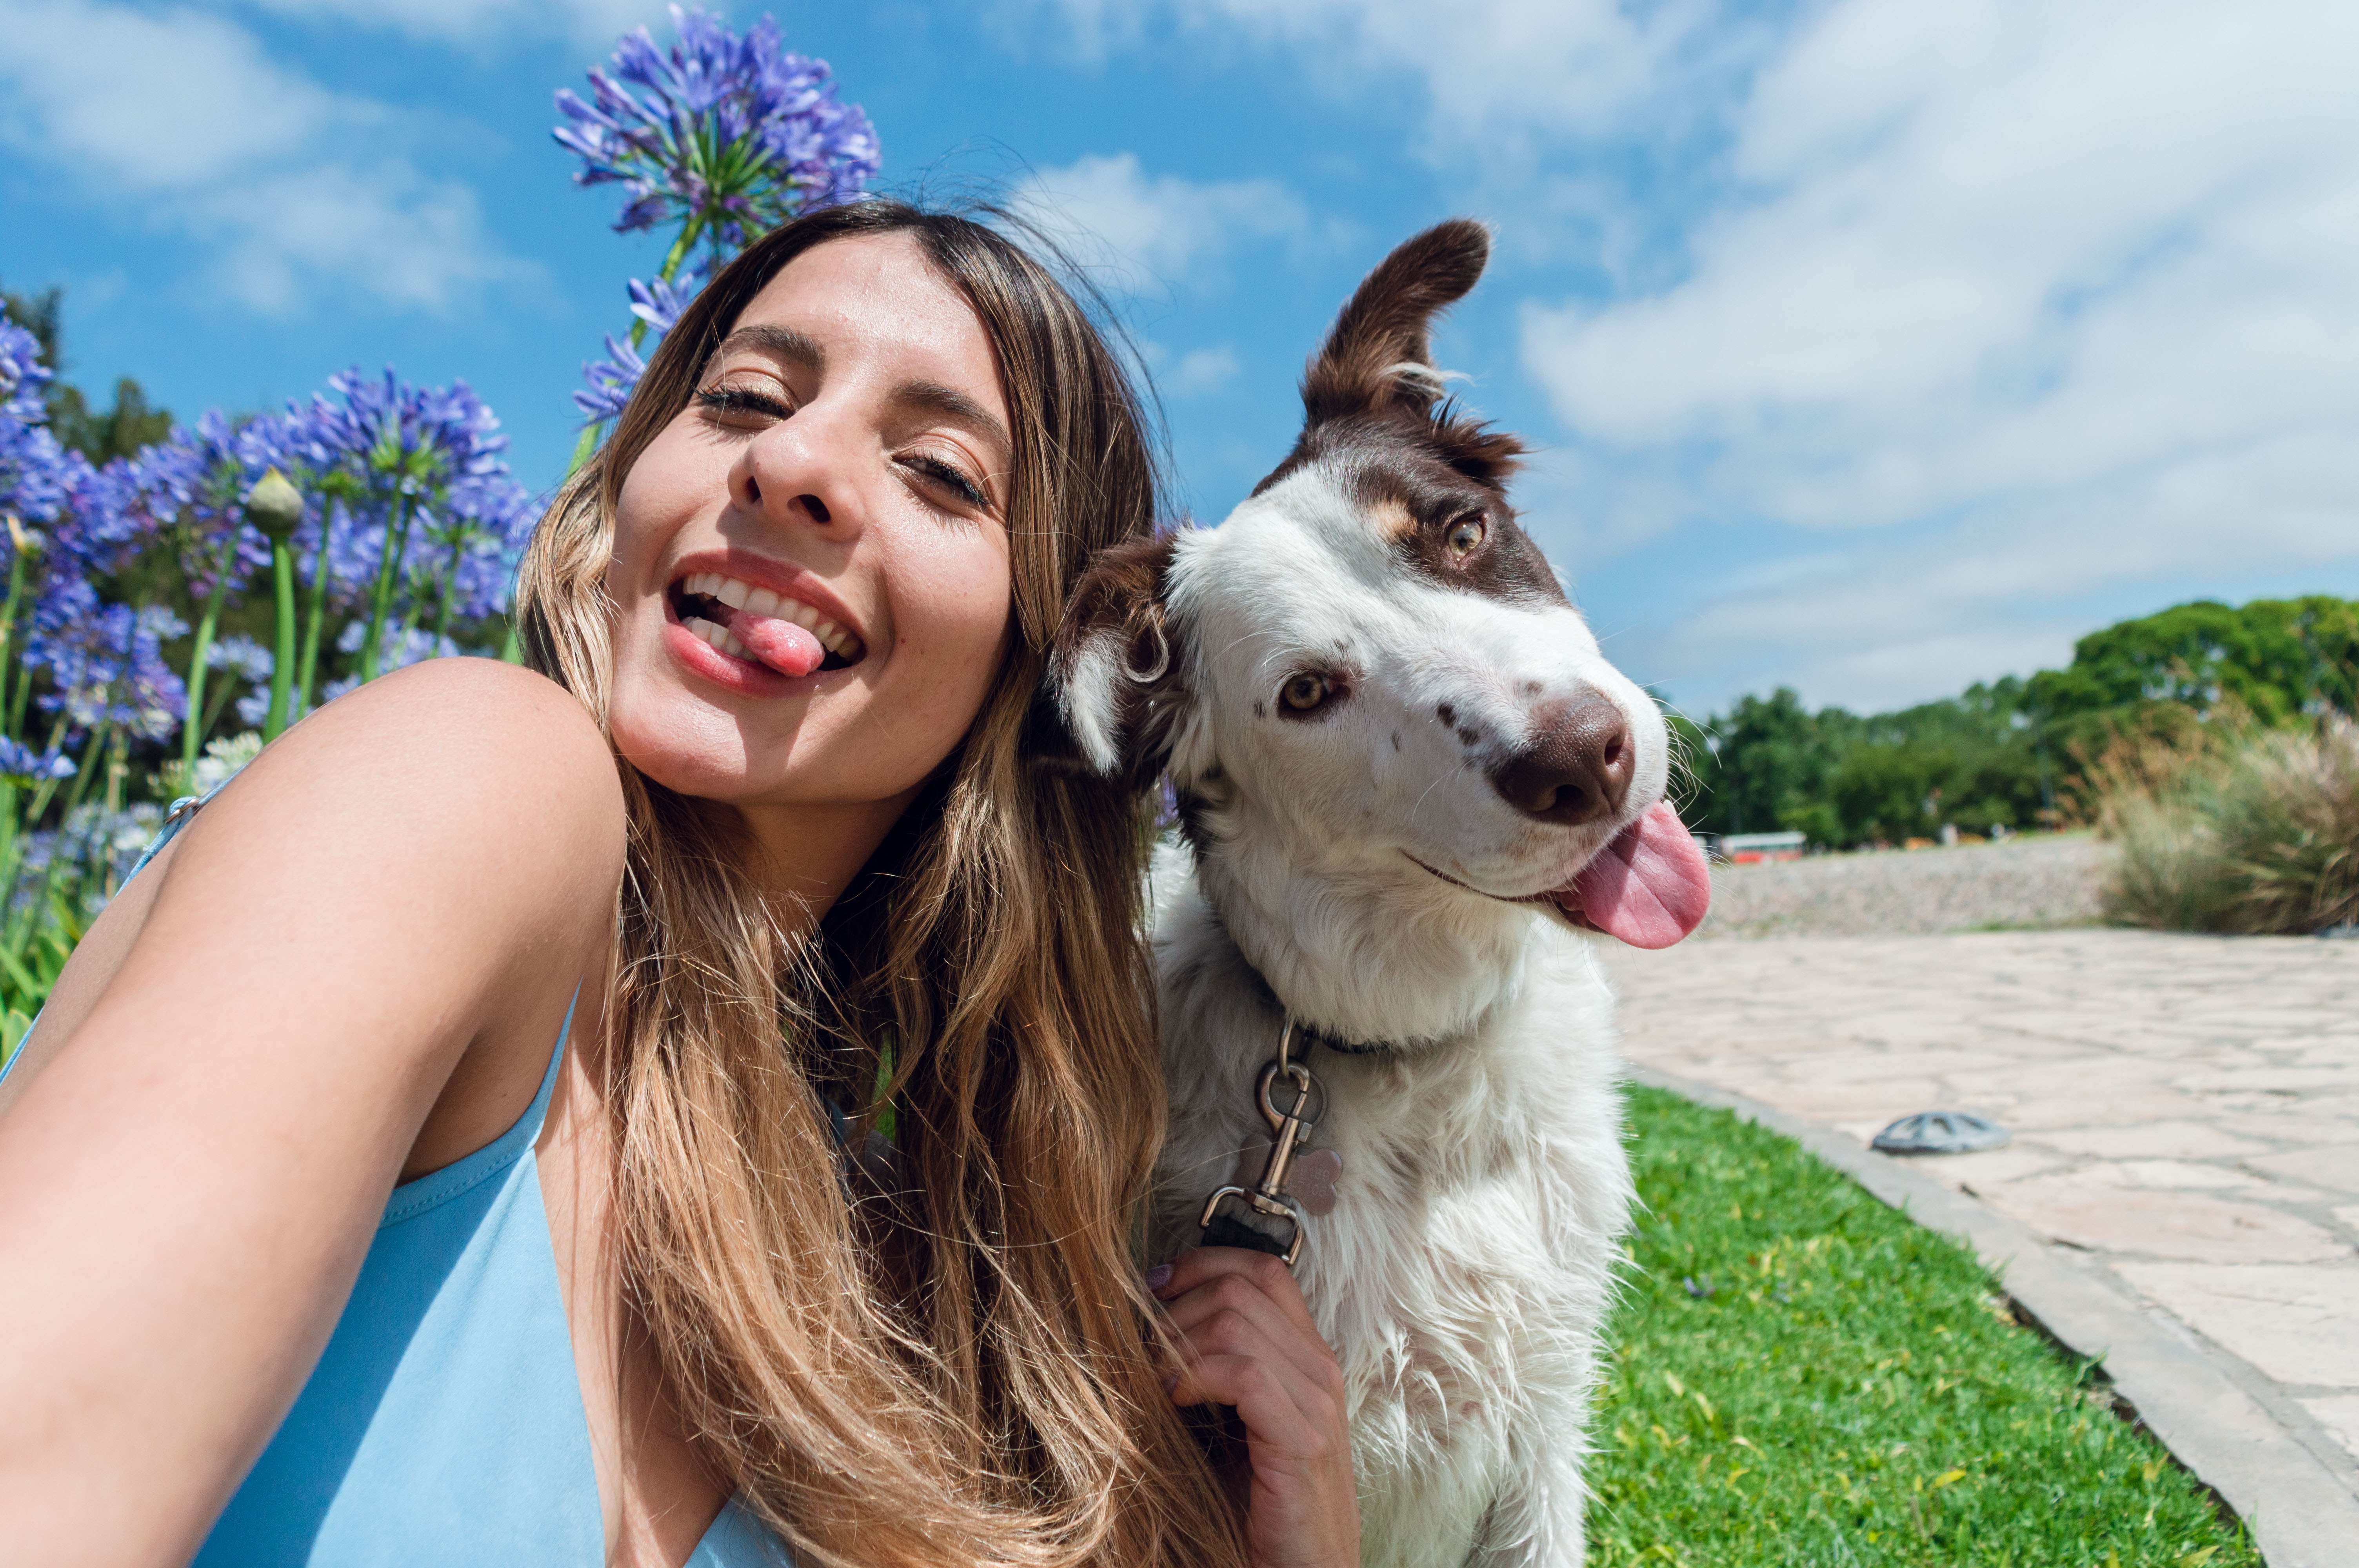 Woman and dog sticking their tongue out